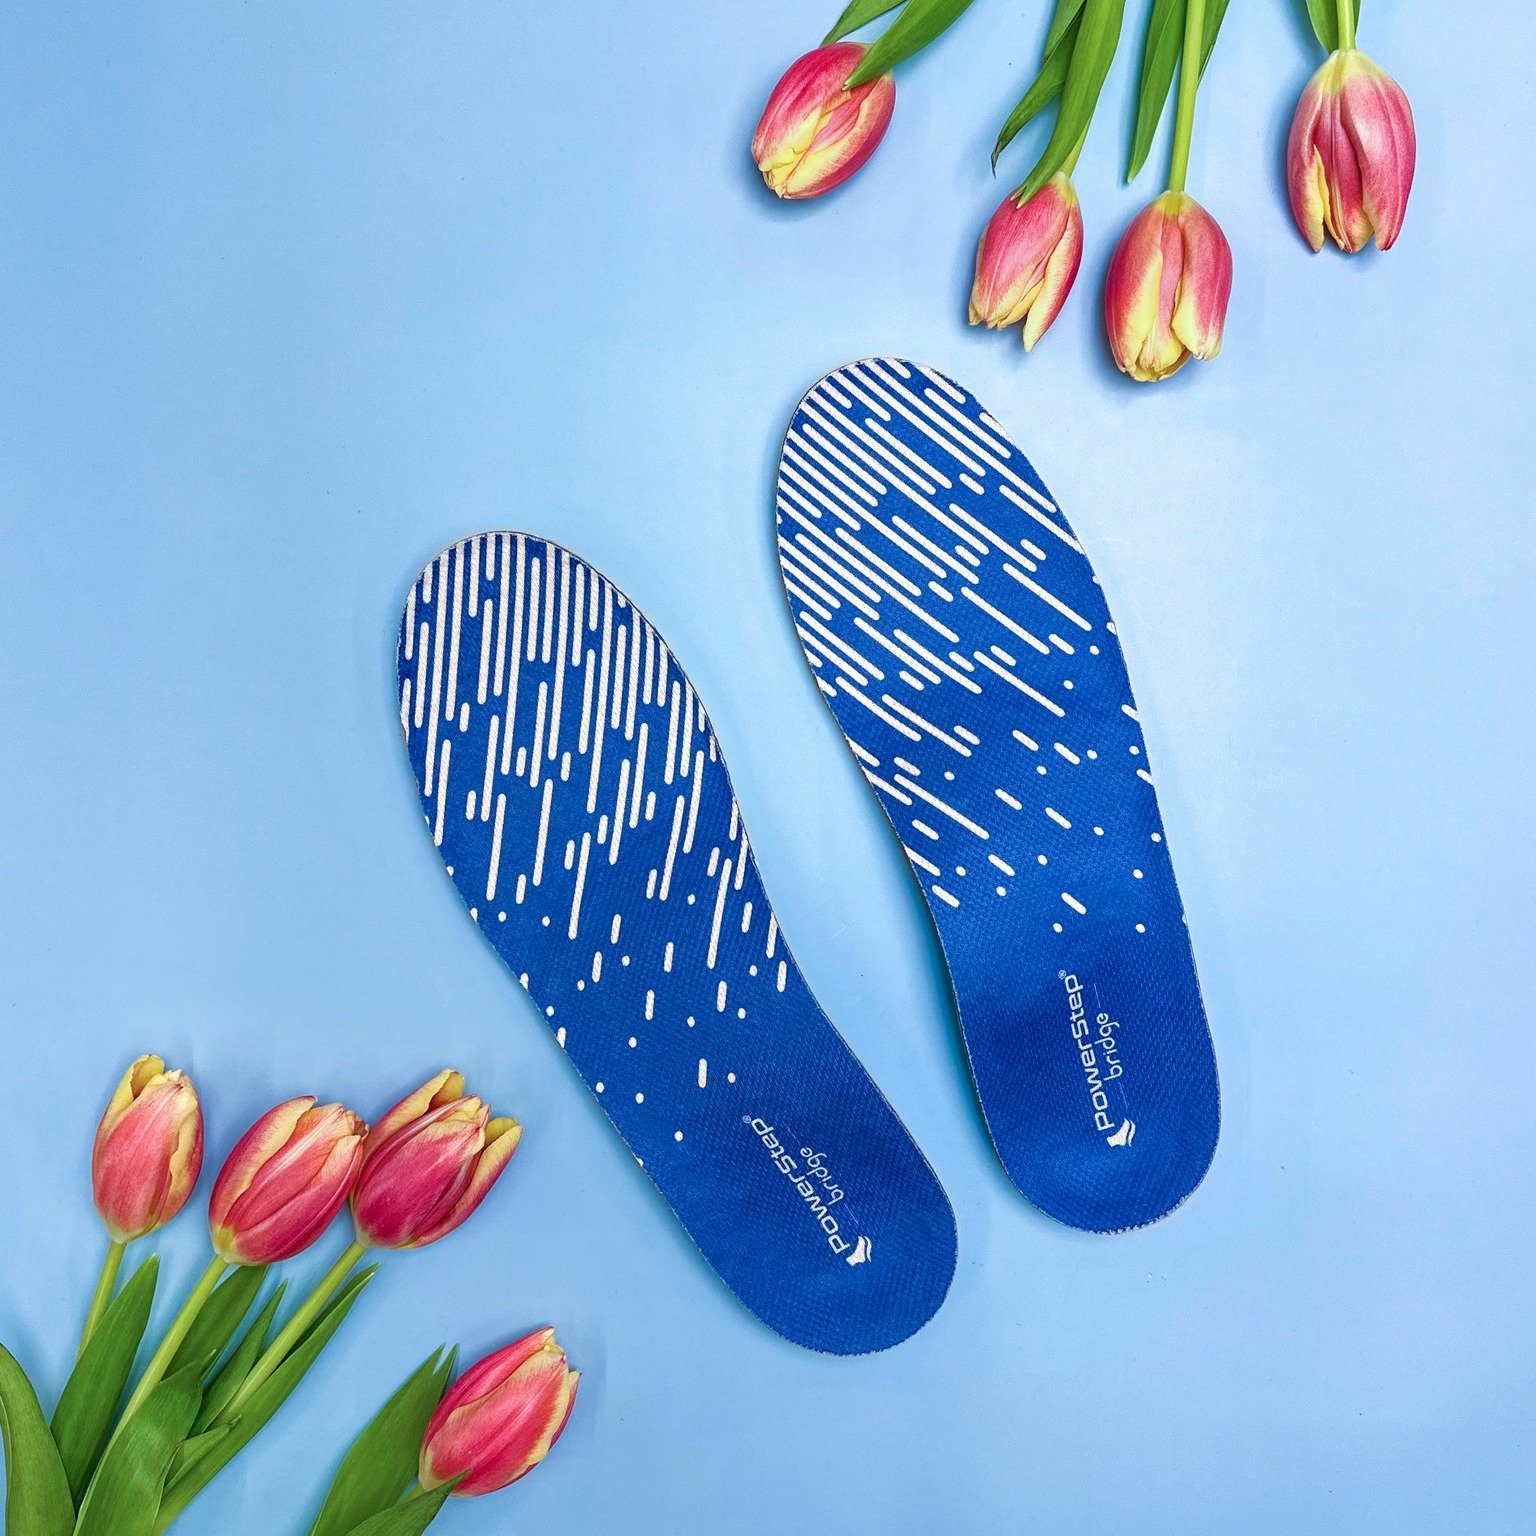 We love our PowerSteps an over-the-counter orthotic available in both our Worland and Thermopolis clinics.  They're a cost-effective option at just $47.99 plus tax,

Say goodbye to aches and pains and hello to better posture with PowerStep&reg; ortho